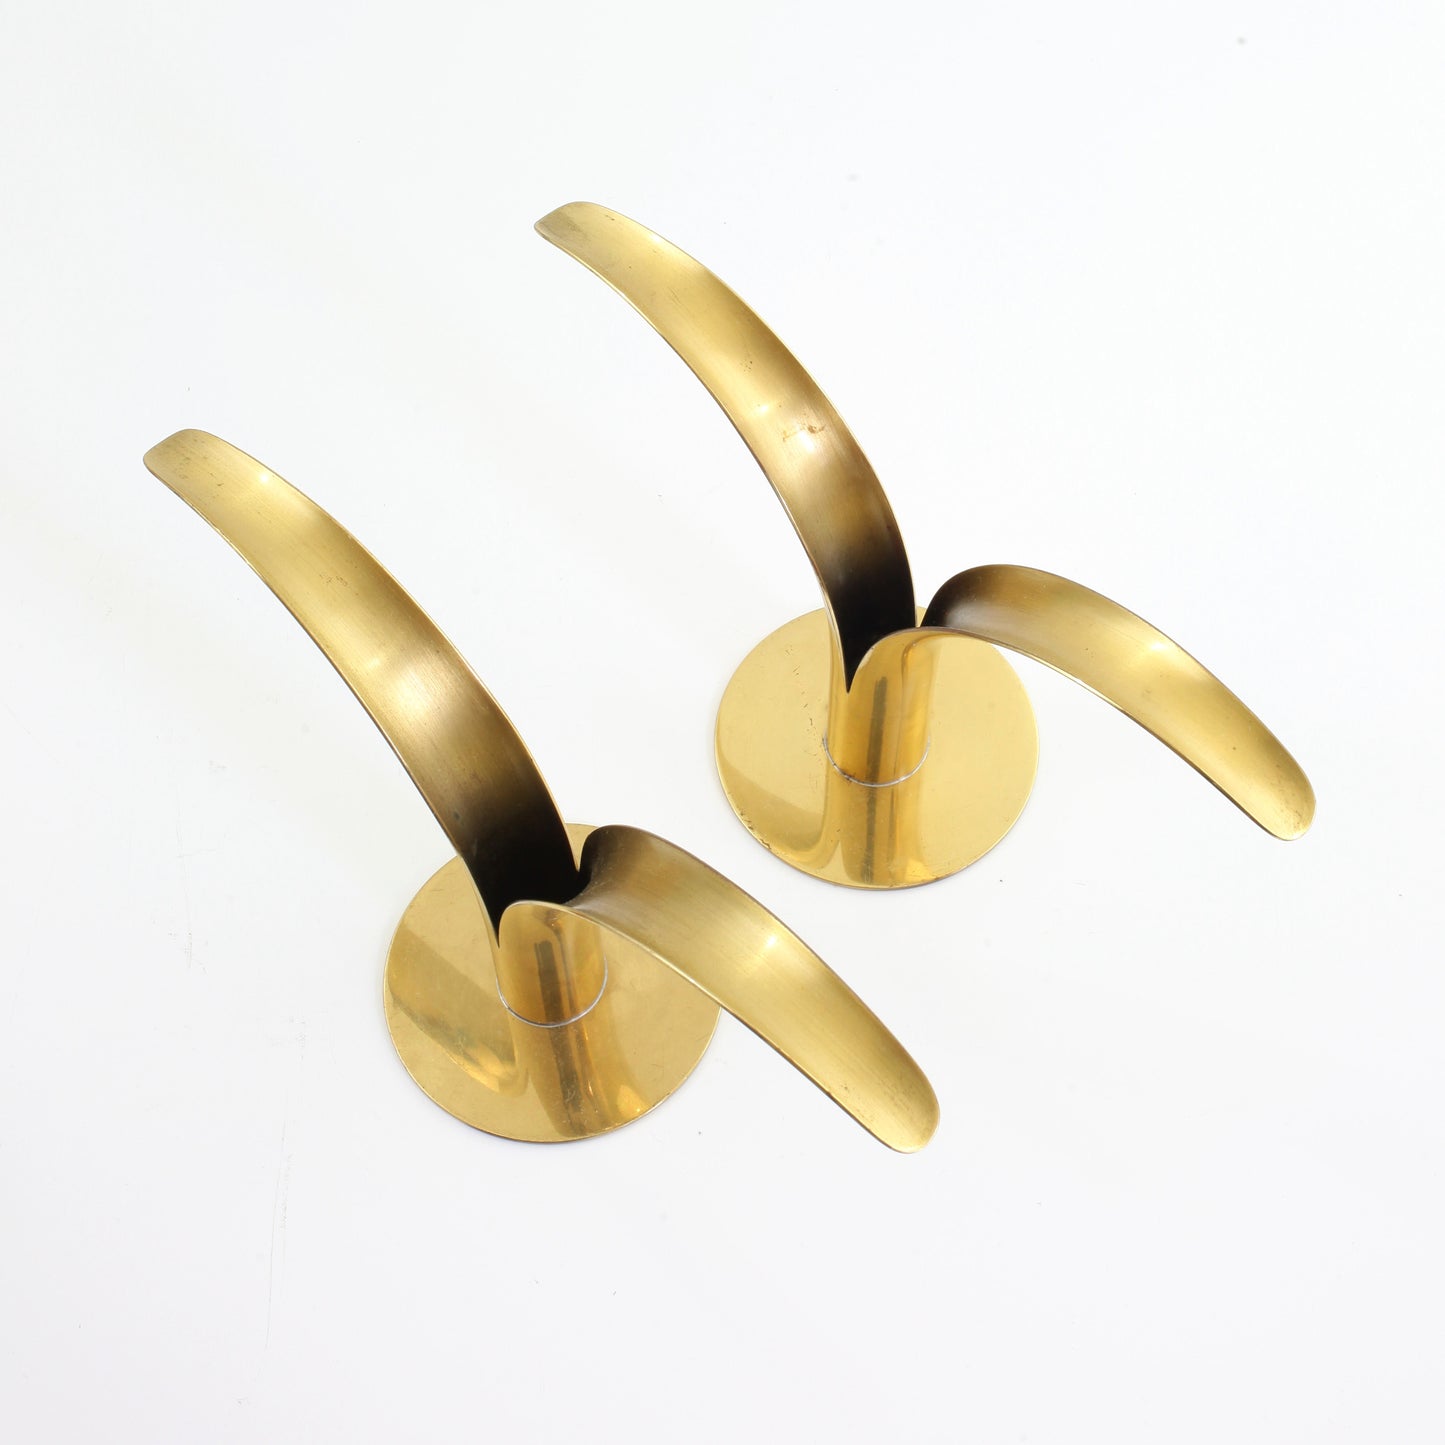 SOLD - Mid Century Modern Ystad Sweden Brass Lily Candle Holders